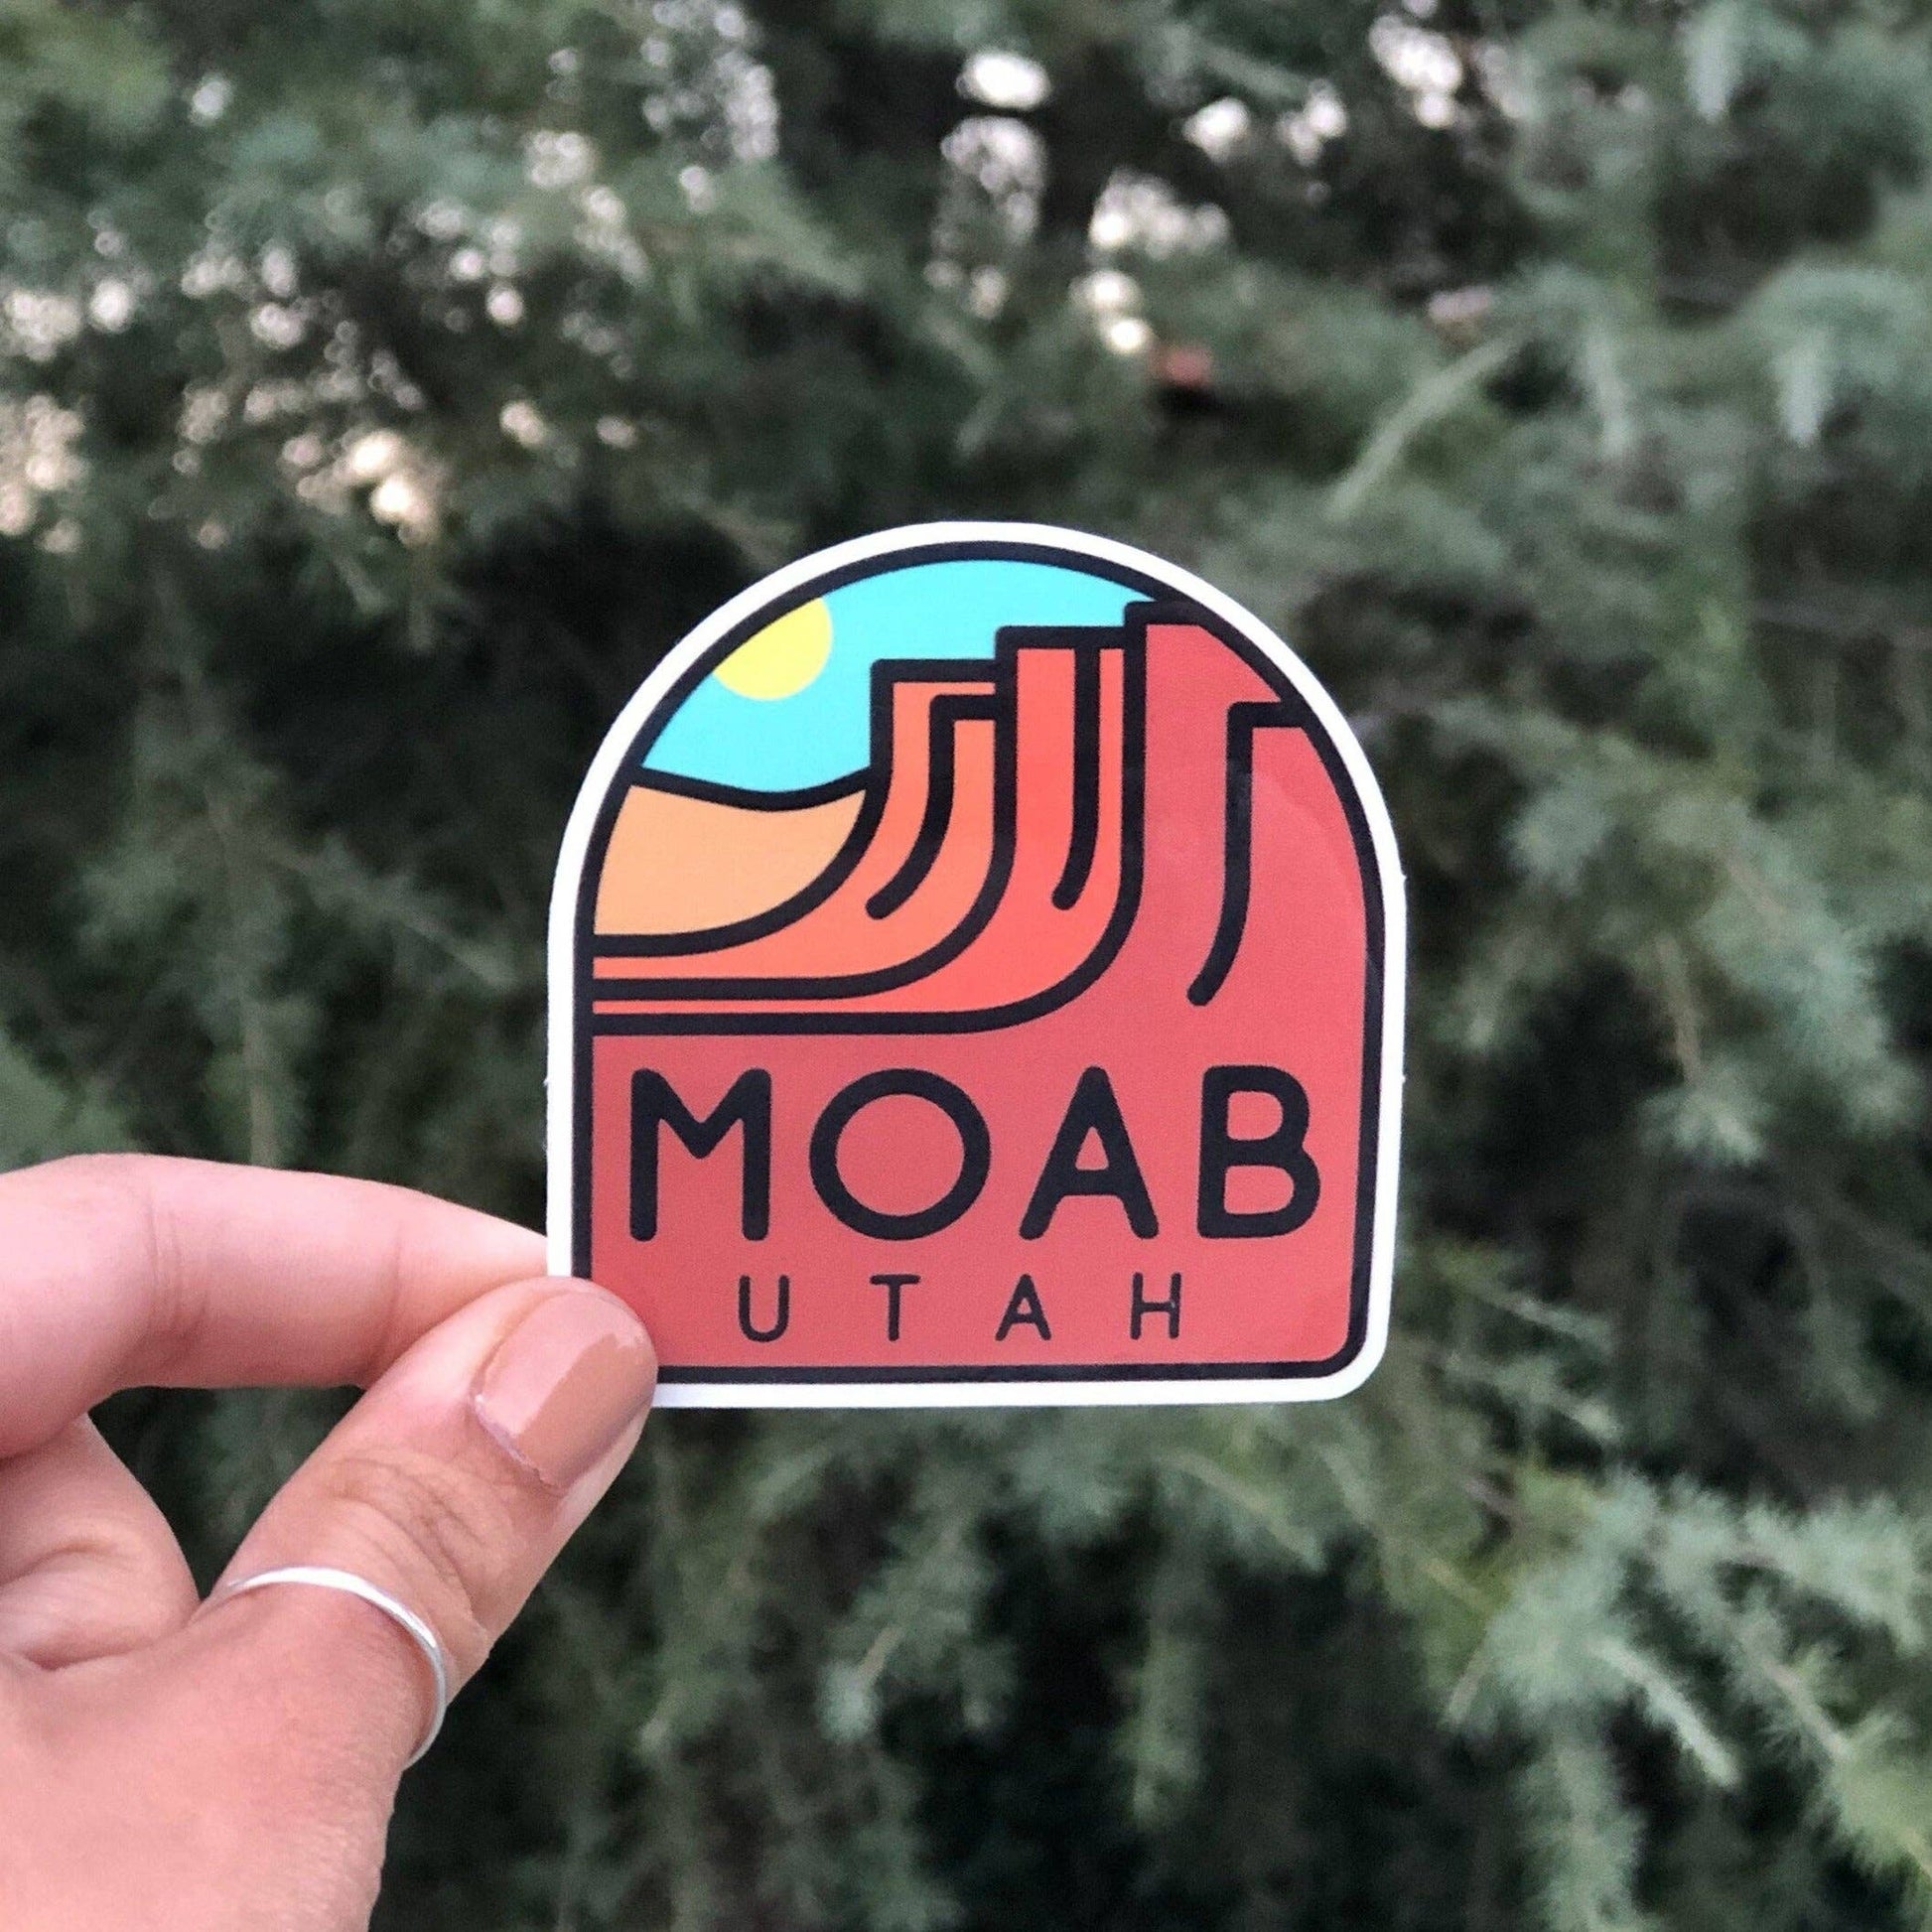 Moab Utah Sticker - Utah Decal - For those who love the Red Rocks, The River, The Hiking, The Exploring - Dixie Hike & Style